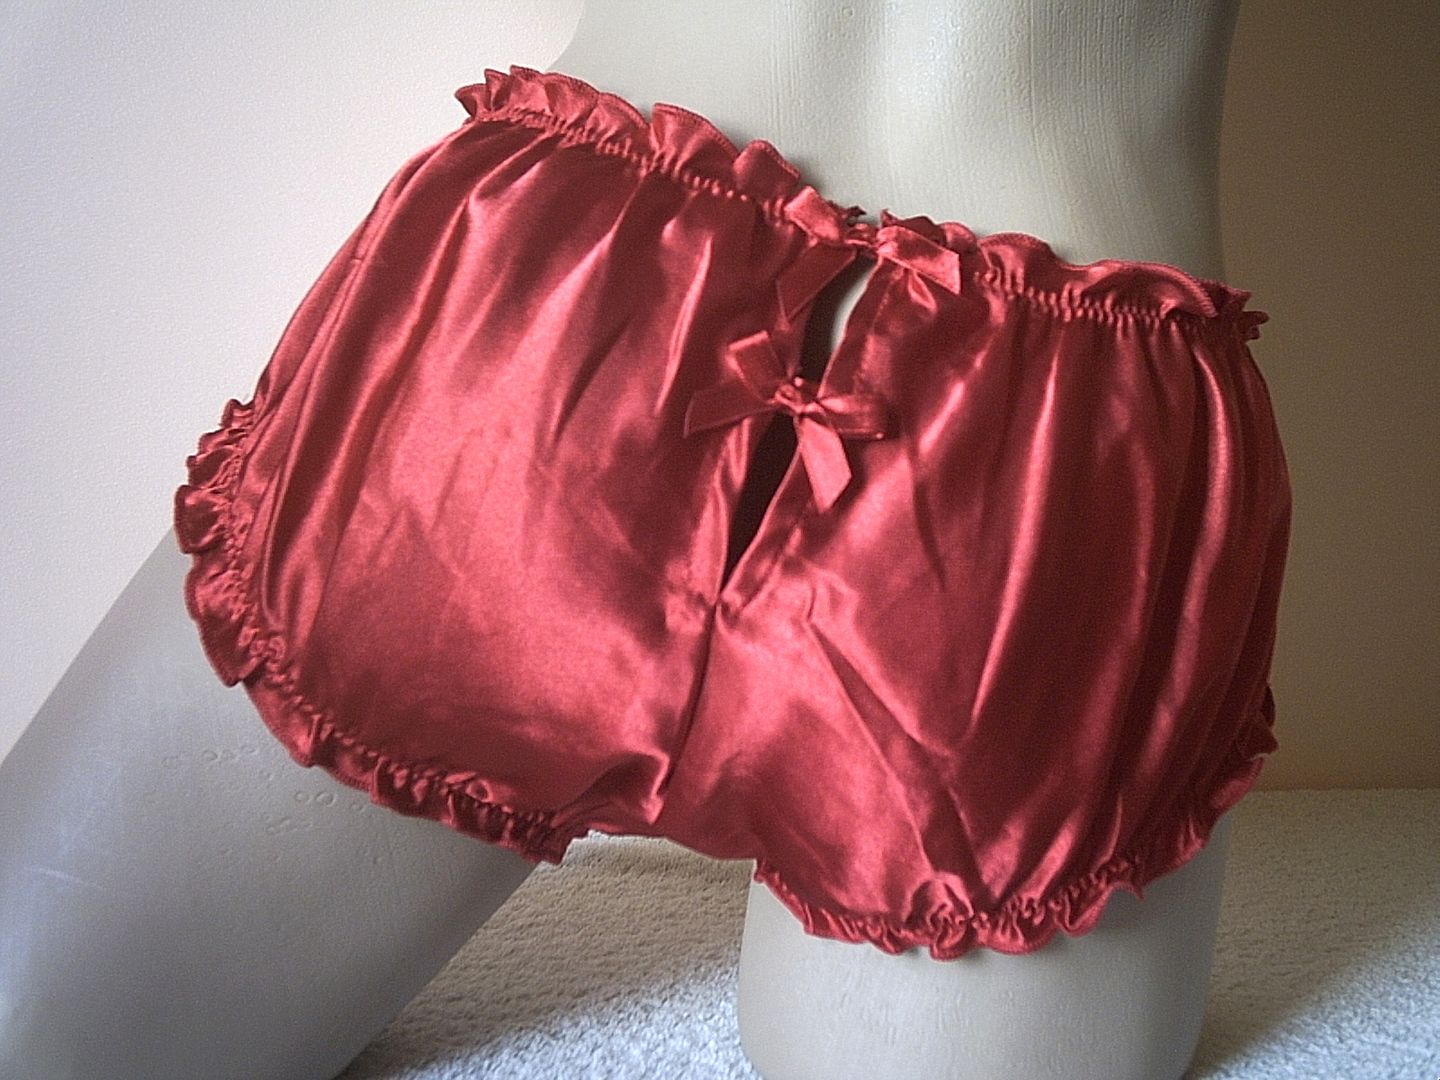 Cute Cherry Red Silky Satin Shorty Brief Panties Frilly Knickers Uk Ml